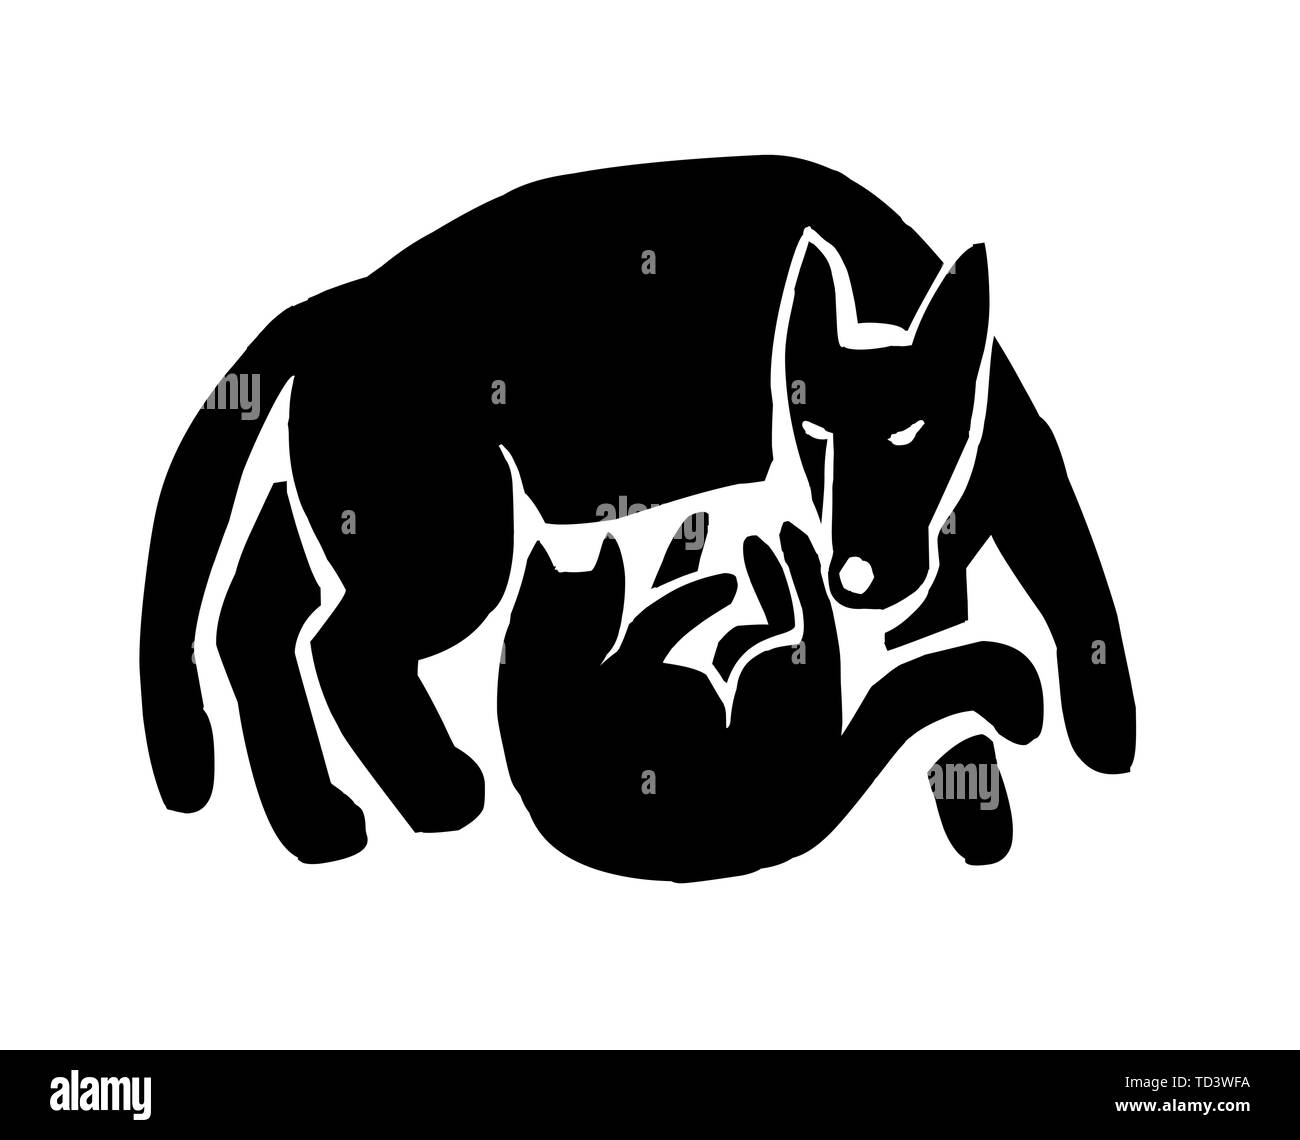 Cat and dog friends together silhouette black white Stock Vector